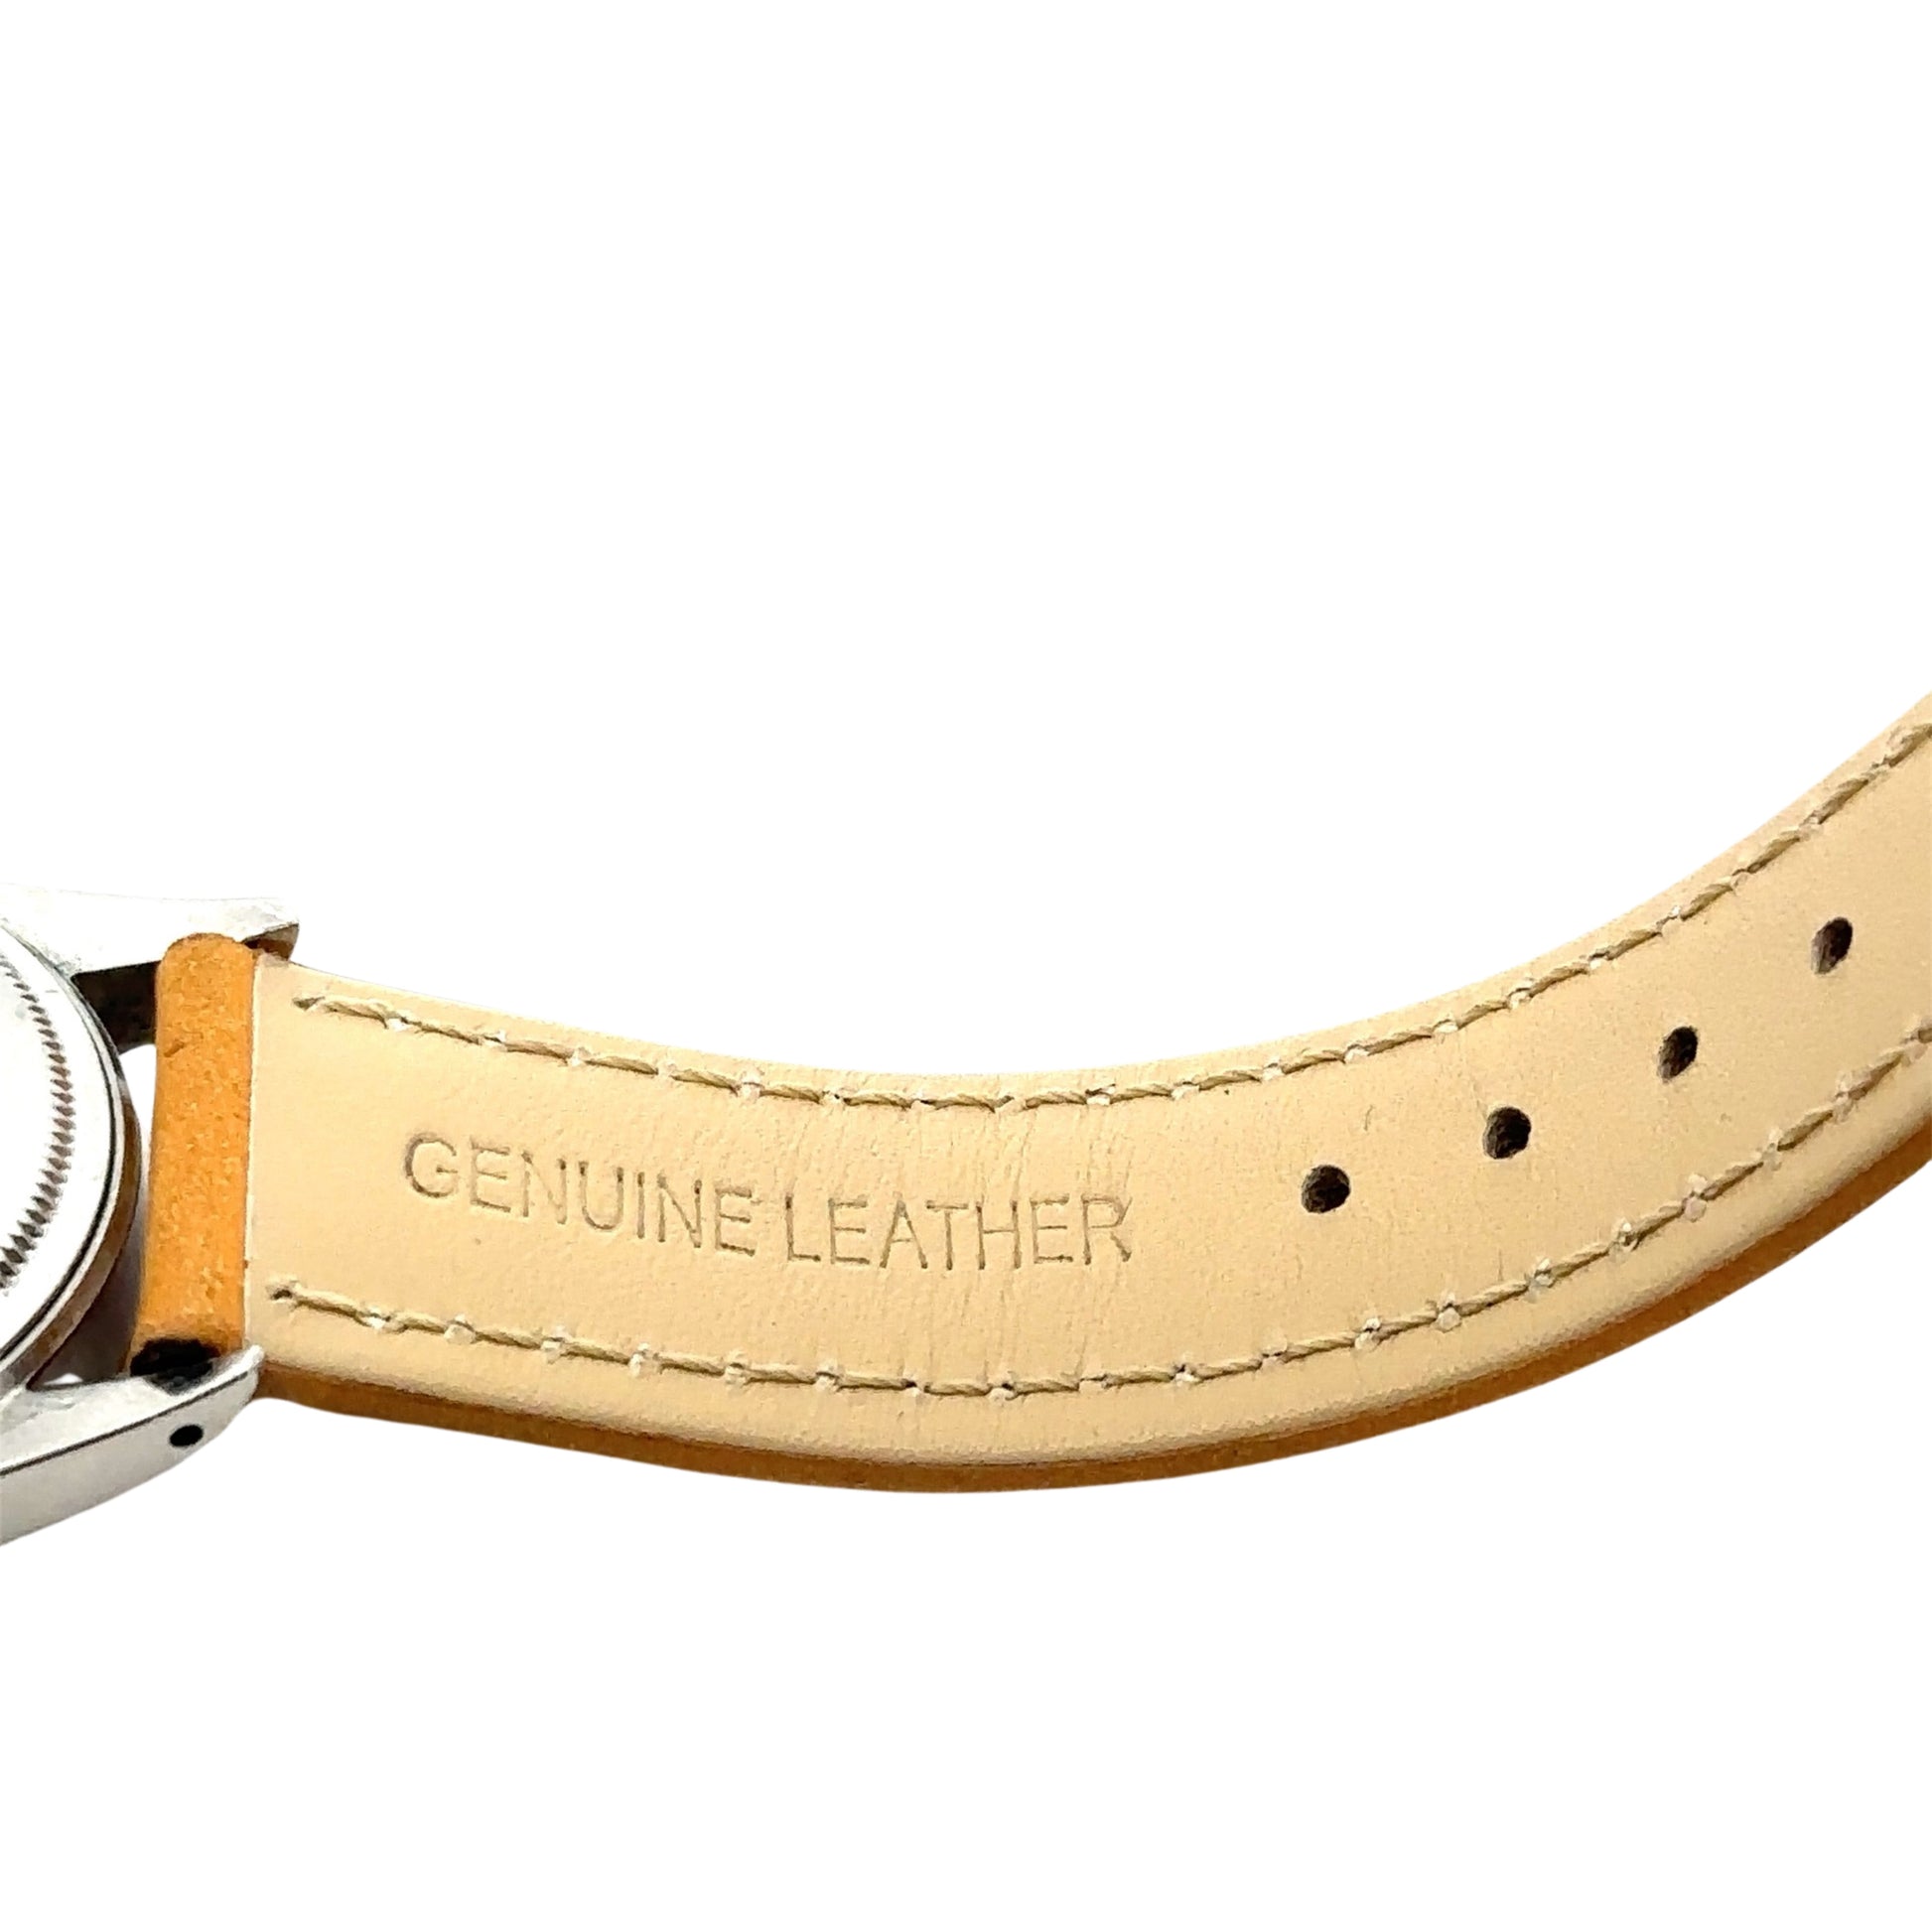 Inside of Genuine Leather band showing wear